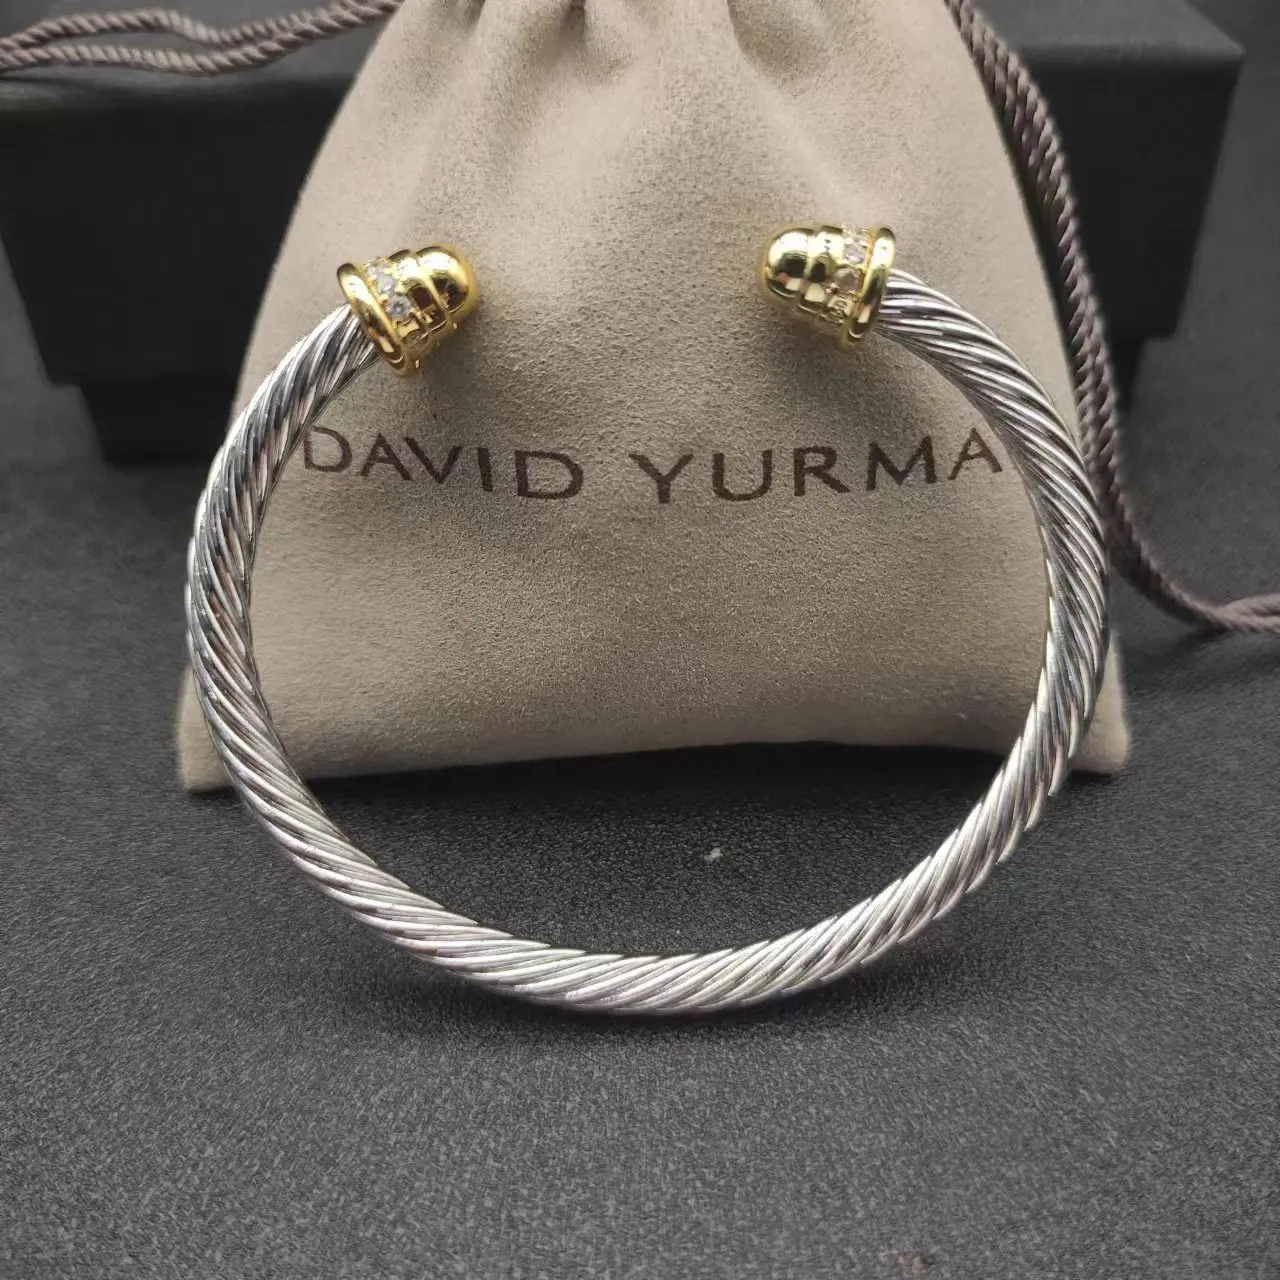 

DY David Yurman 5MM Round Head Color Separation Bracelet Buckle in Sterling Silver with 18K Rose Gold PLATED